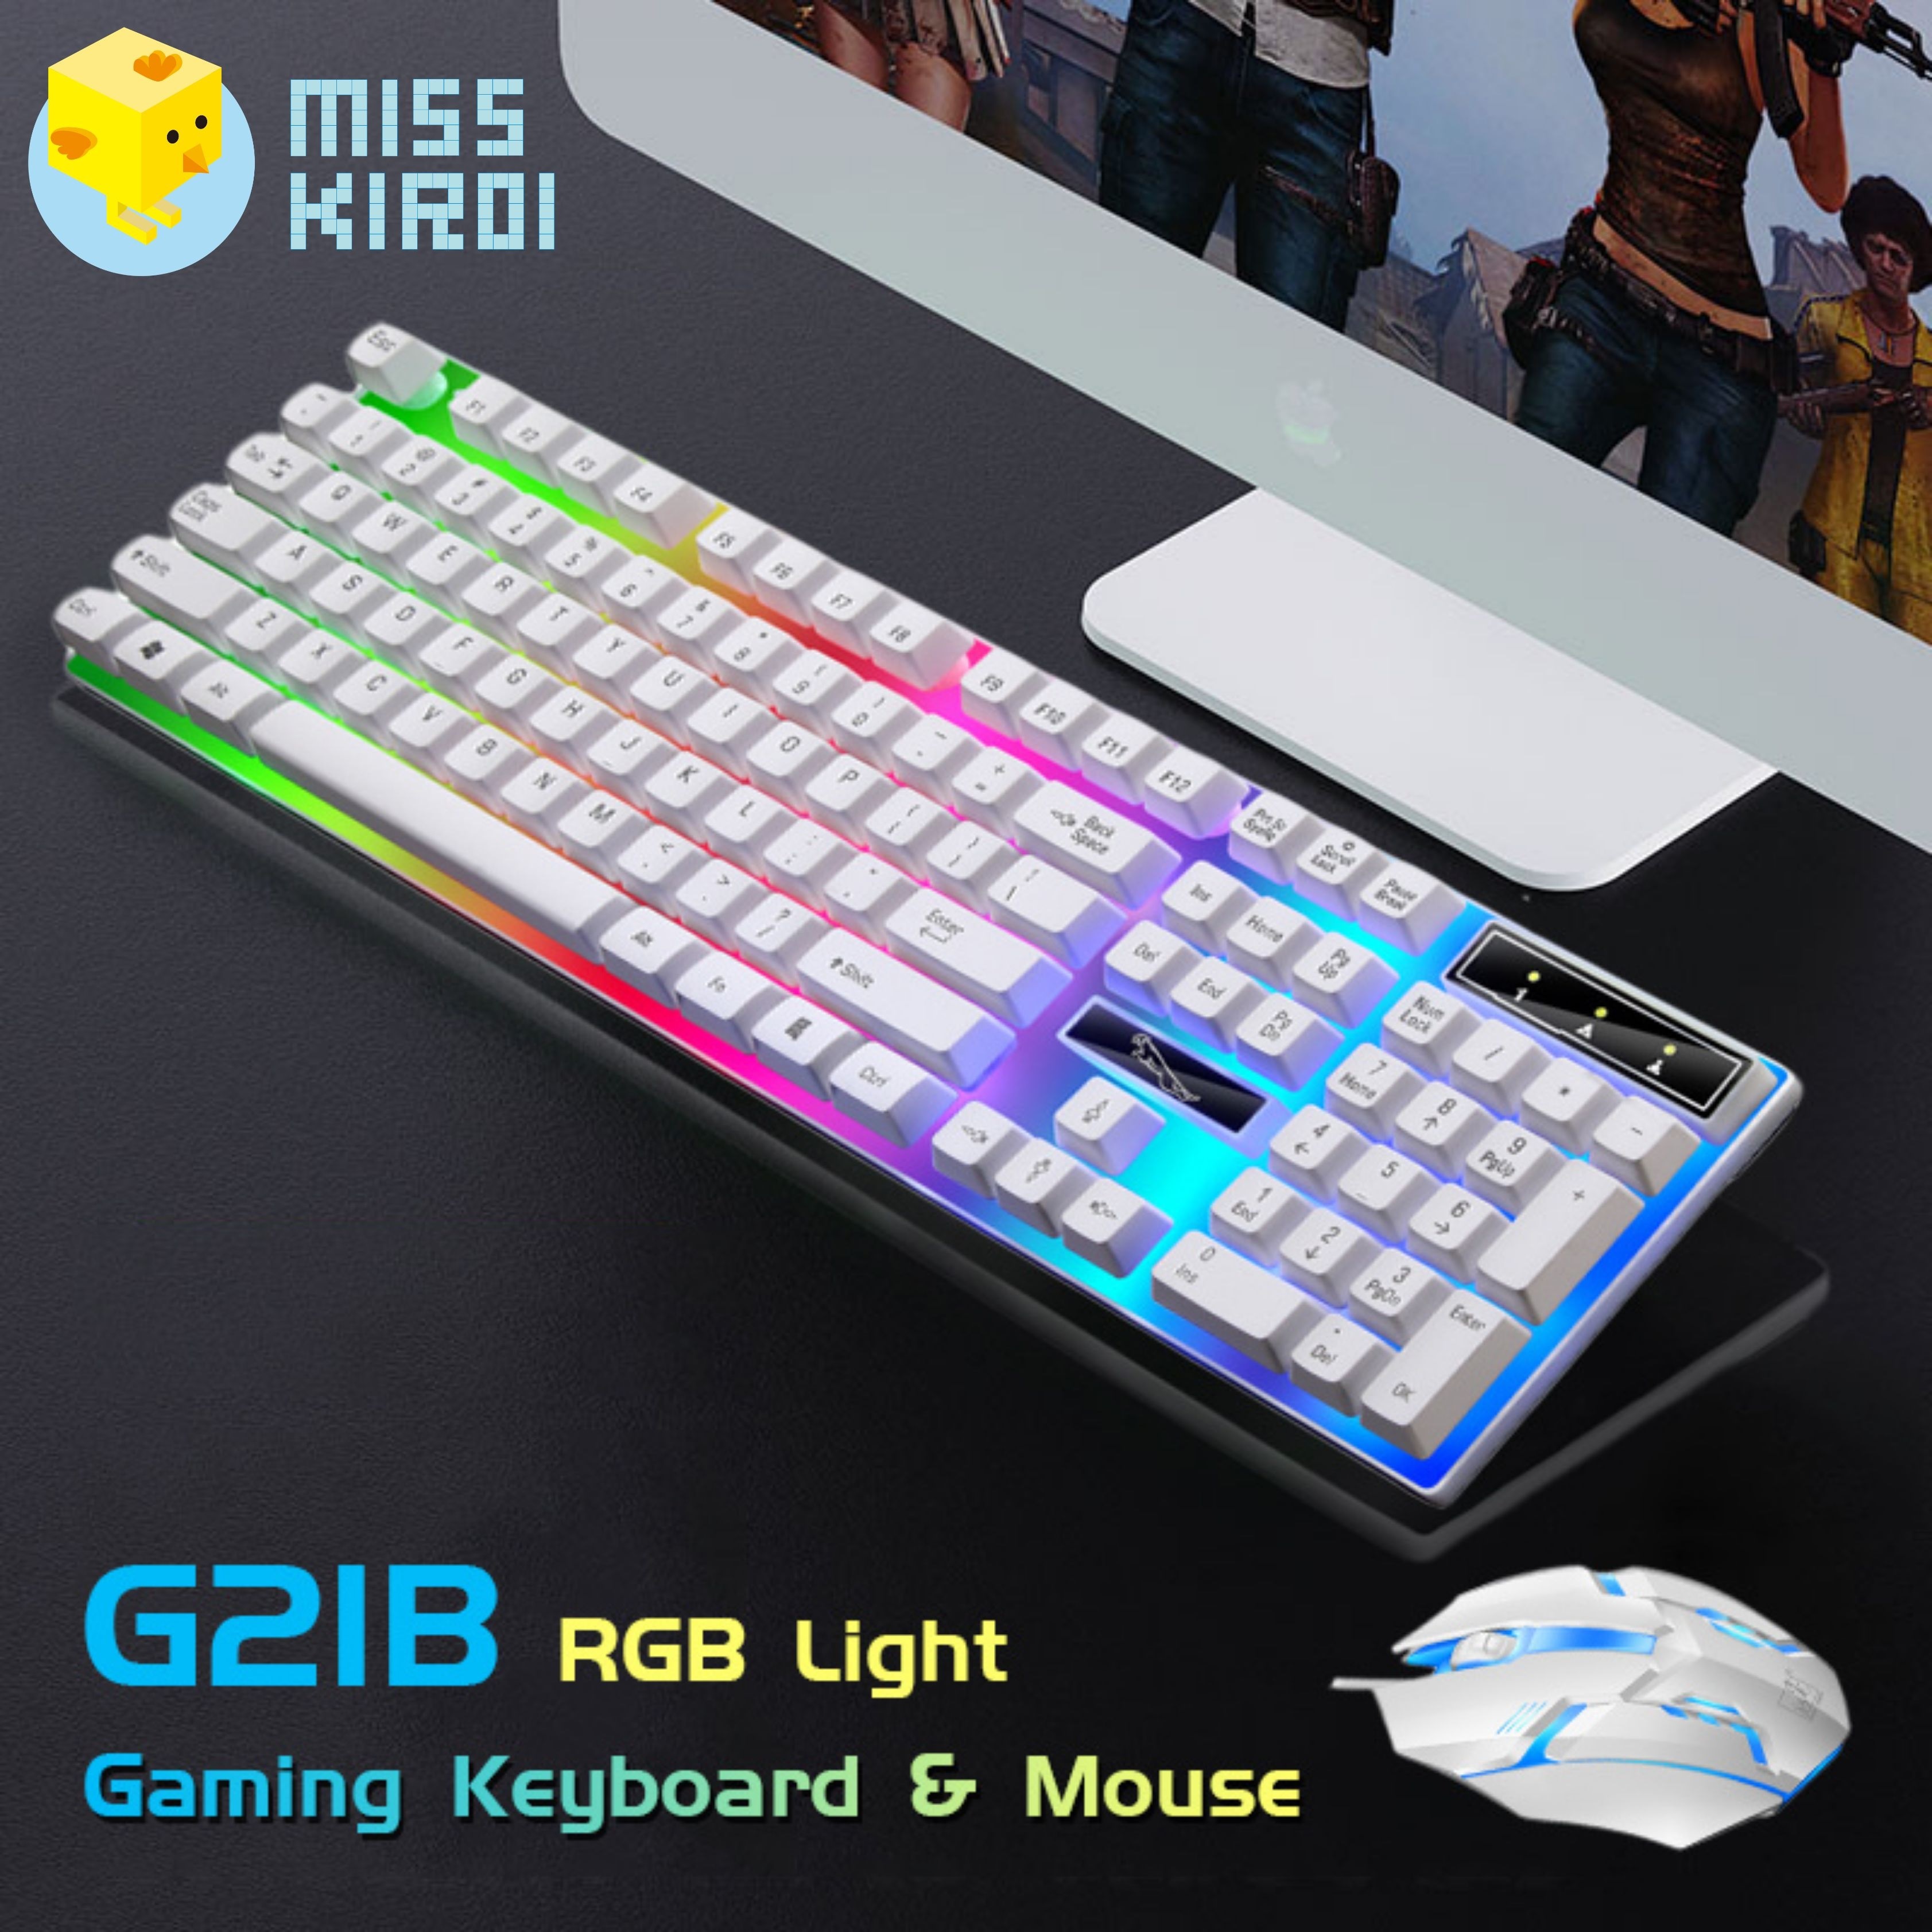 Miss Kiroi G21B Keyboard and Mouse Combo Set English Layout แป้นพิมพ์สำหรับเล่นเกม Office/Gaming Mechanical Feeling 104 Round Key USB Wired RGB LED Backlight